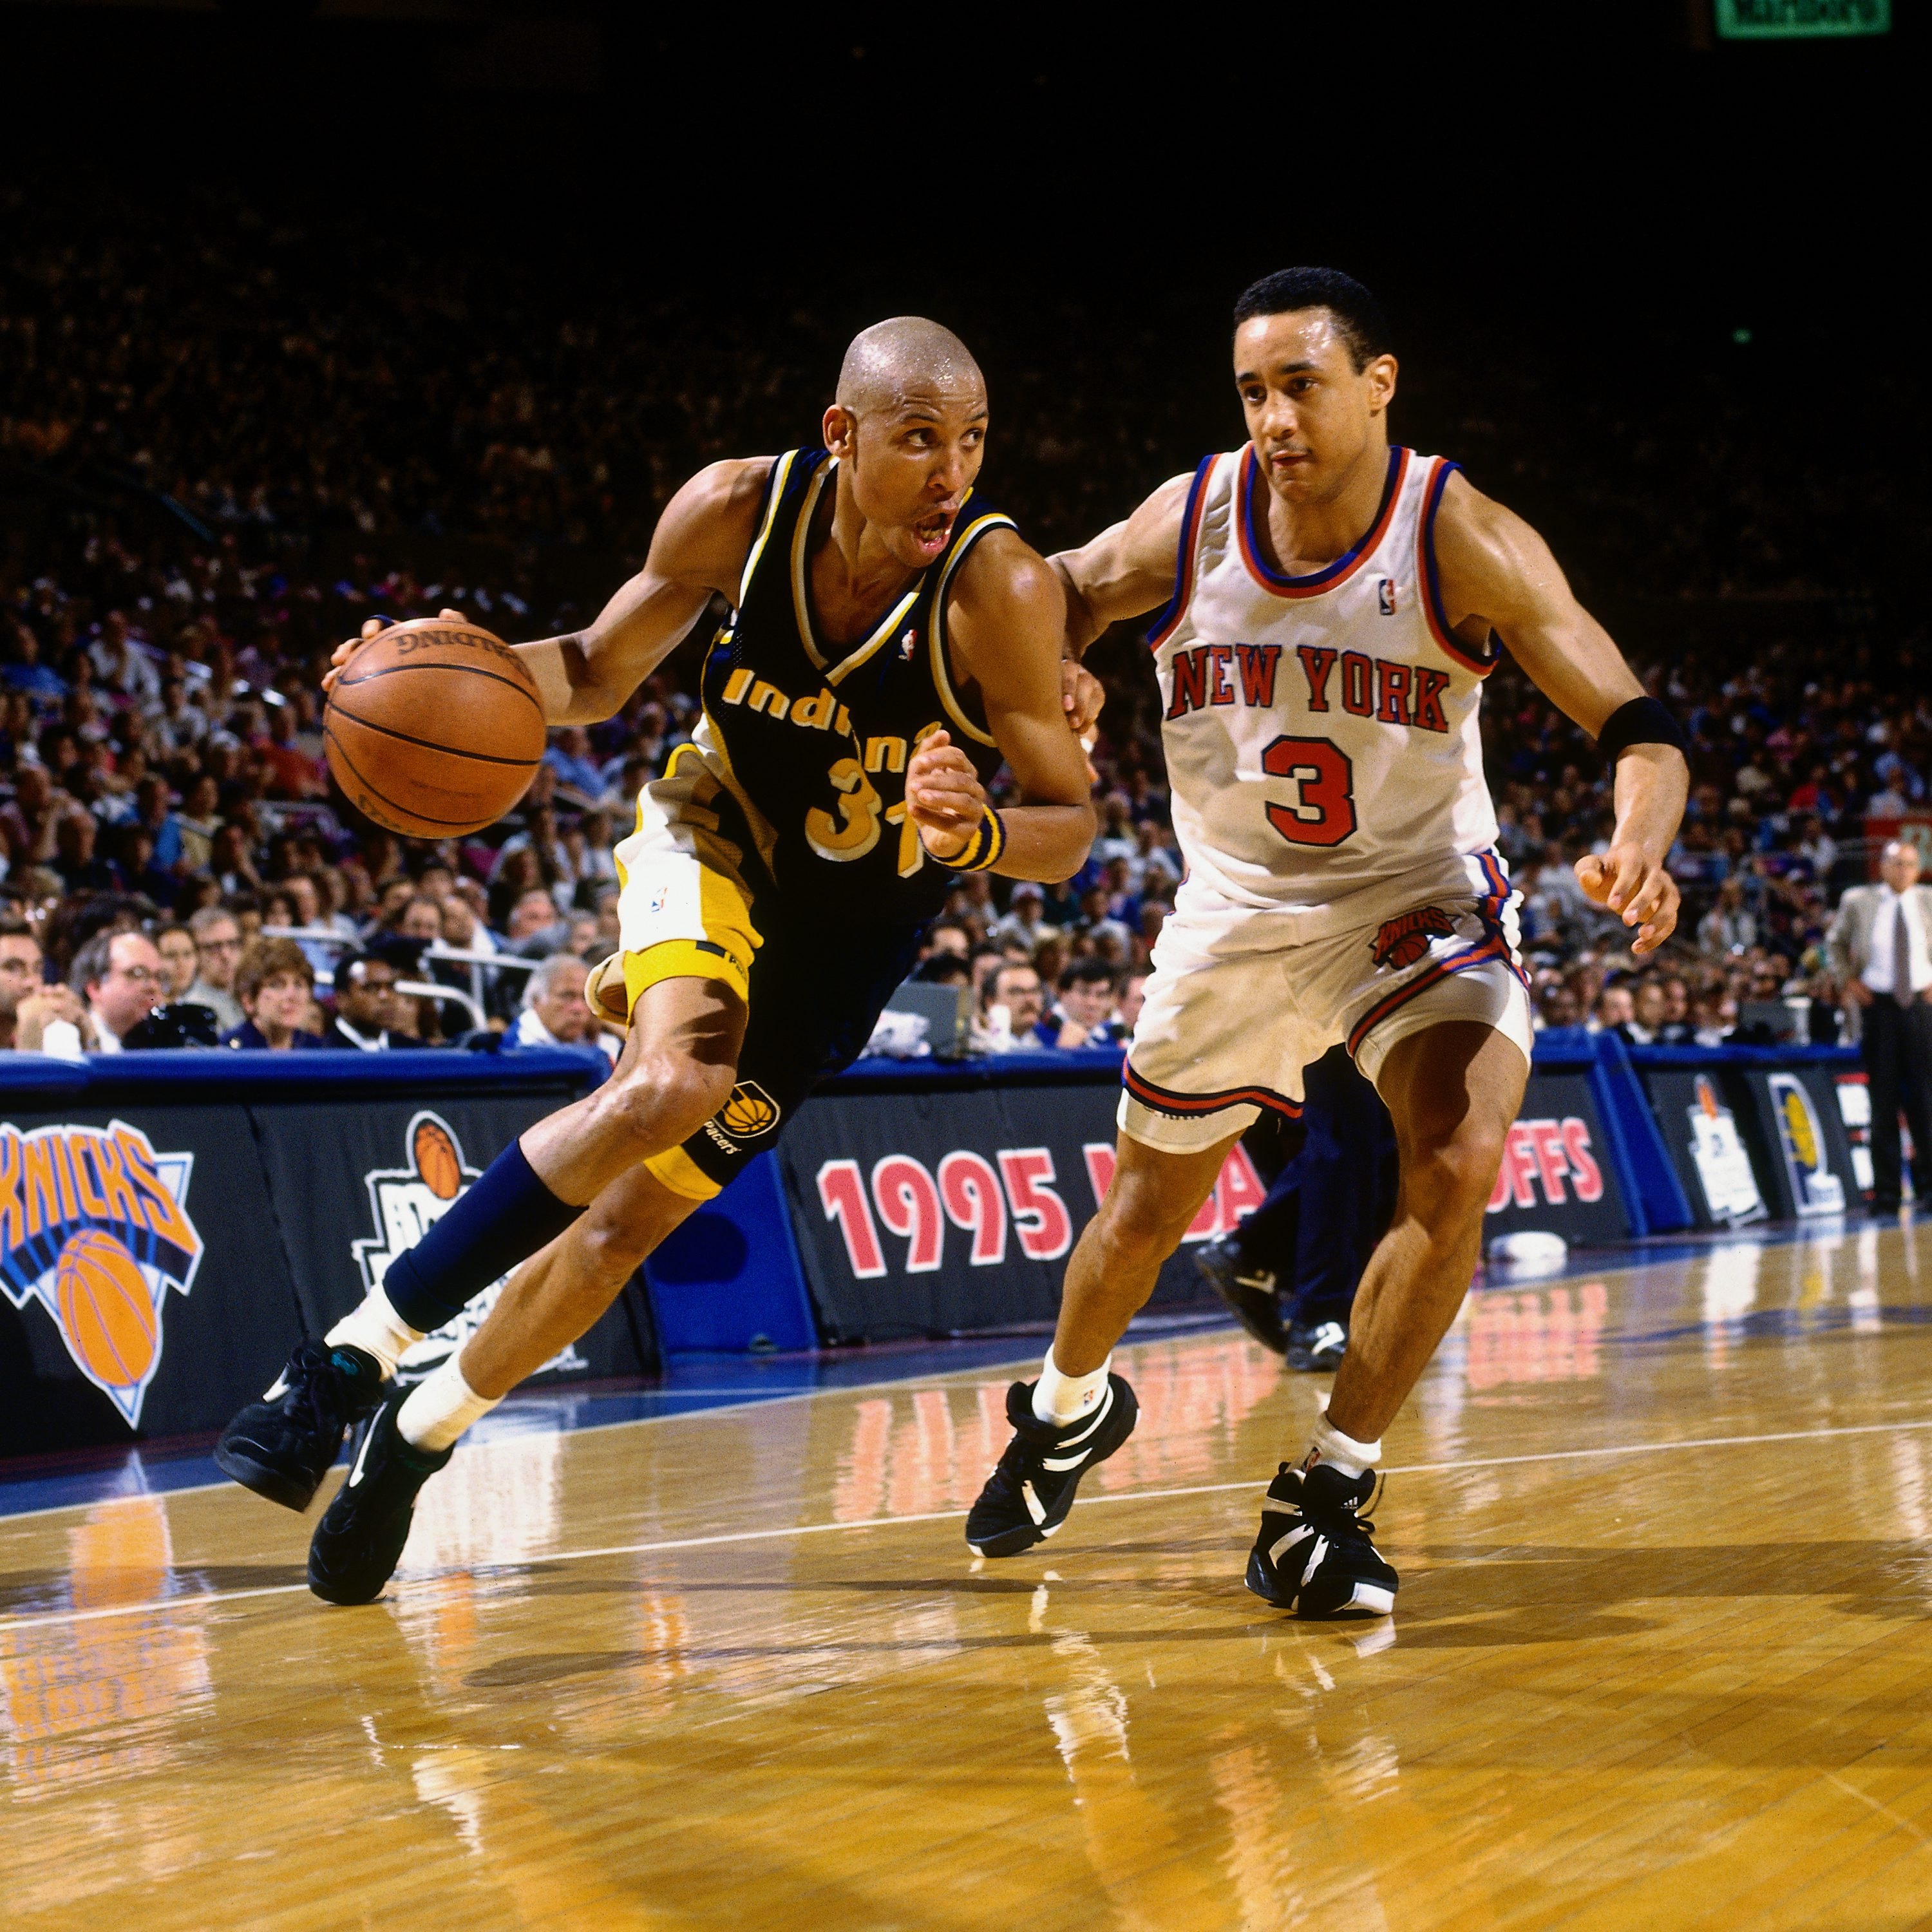 Reggie Miller #31 of the Indiana Pacers drives to the basket against John Starks #3 of the New York Knicks in Game Seven of the 1995 Eastern Conference Semifinals played on May 21, 1995 at Madison Square Garden in New York, New York. (credit: Nathaniel S. Butler/NBAE via Getty Images)